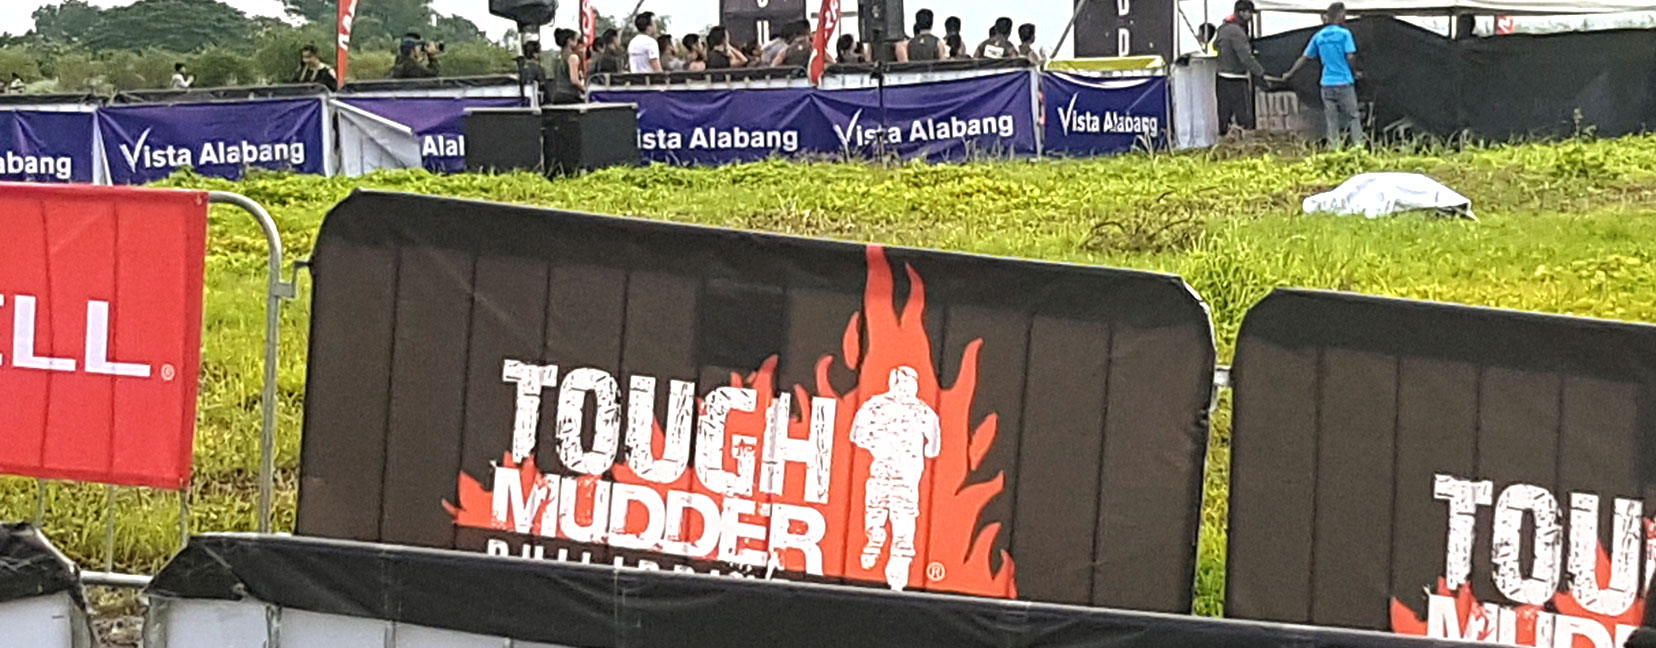 Open Access BPO employees tough it out on 1st Tough Mudder PH